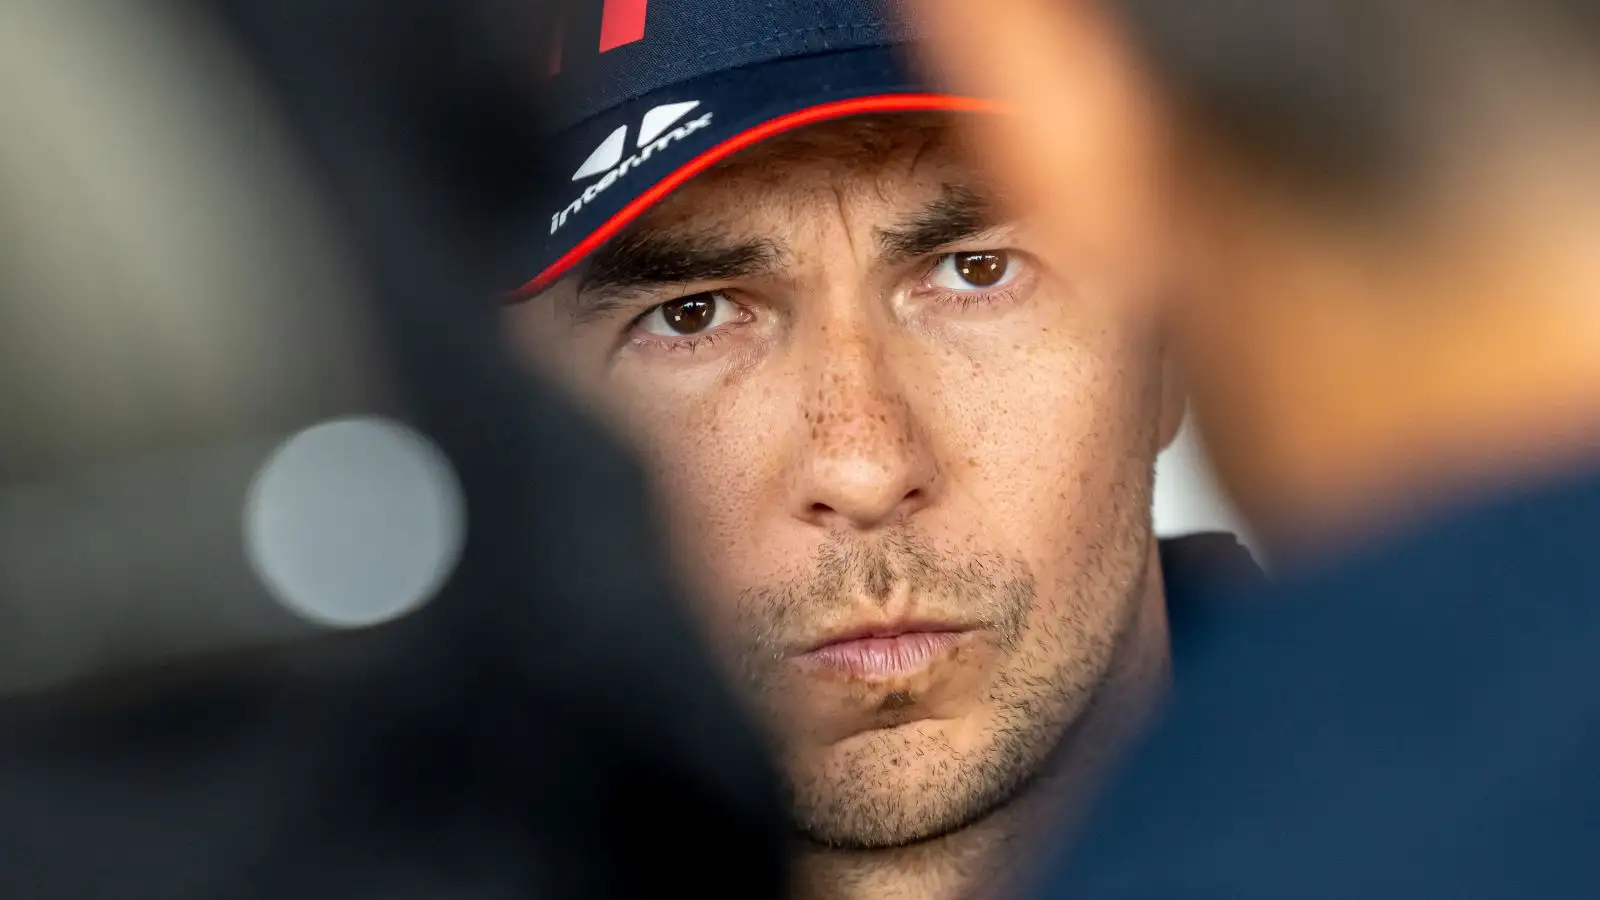 Red Bull driver Sergio Perez faces questions from the media at the Dutch Grand Prix at Zandvoort.